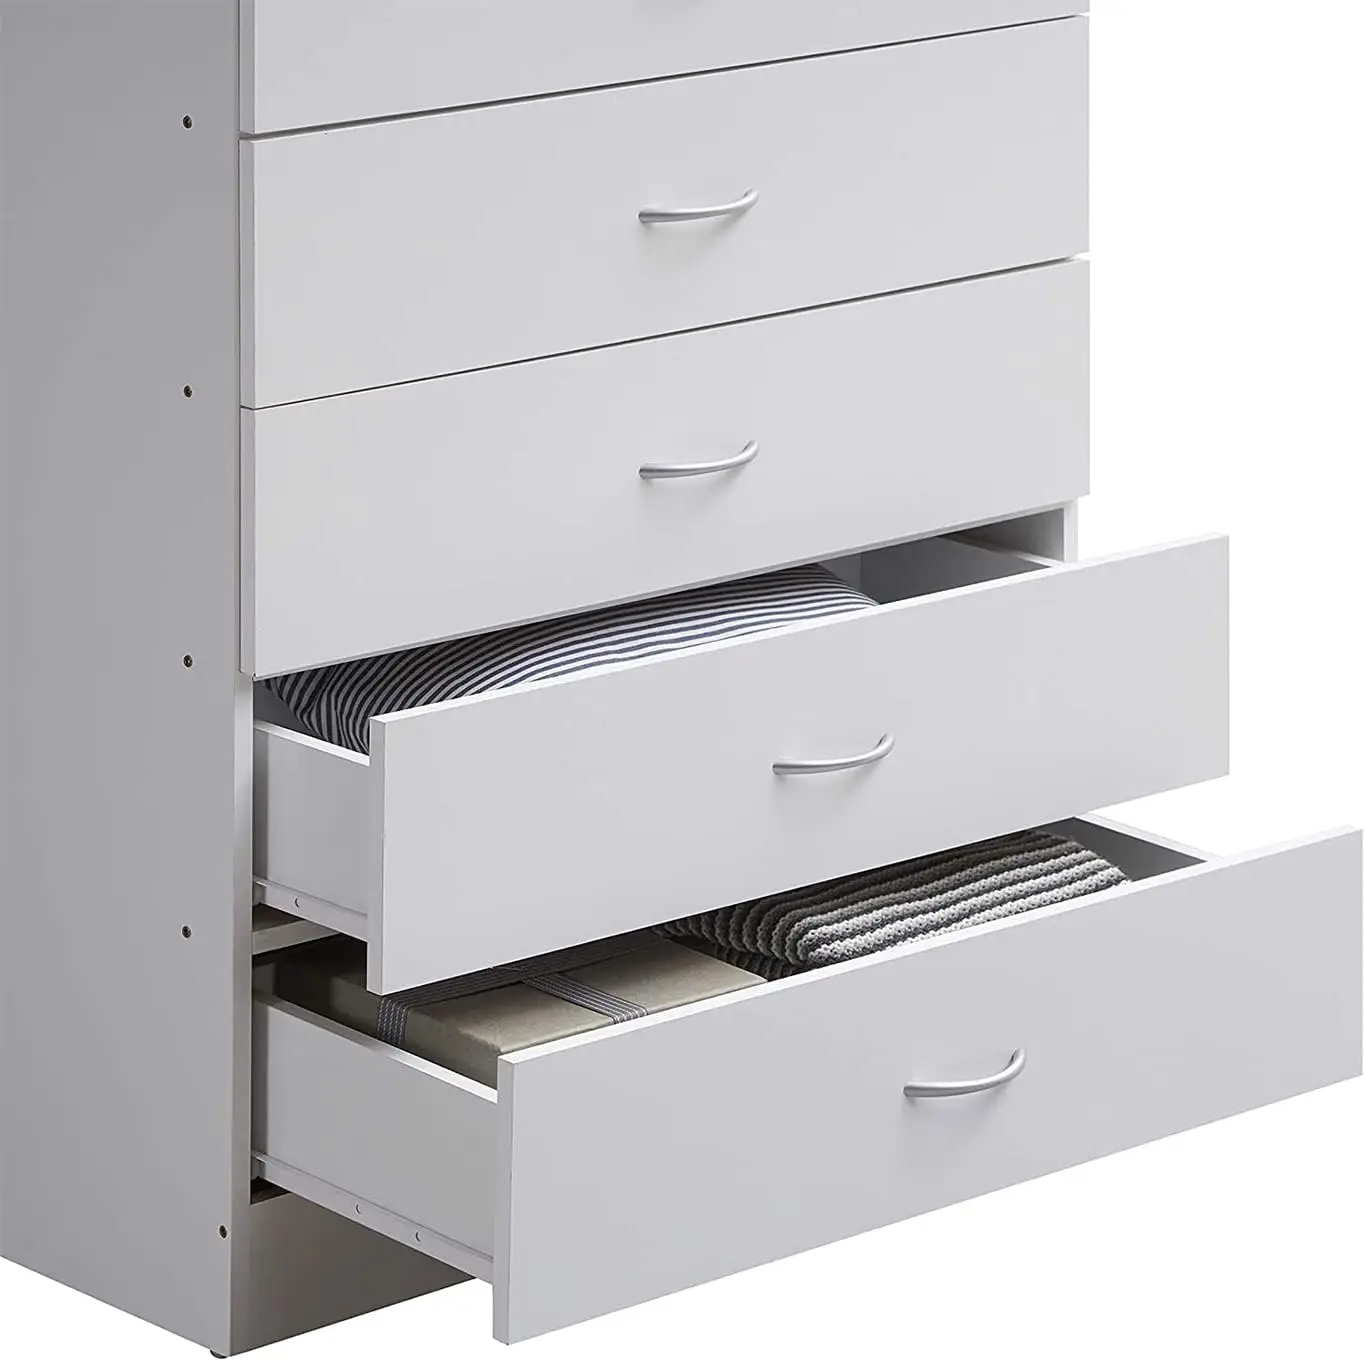 7 Drawer Wood Dresser for Bedroom, 31.5 inch Wide Chest of Drawers, with 2 Locks on the Top Drawers